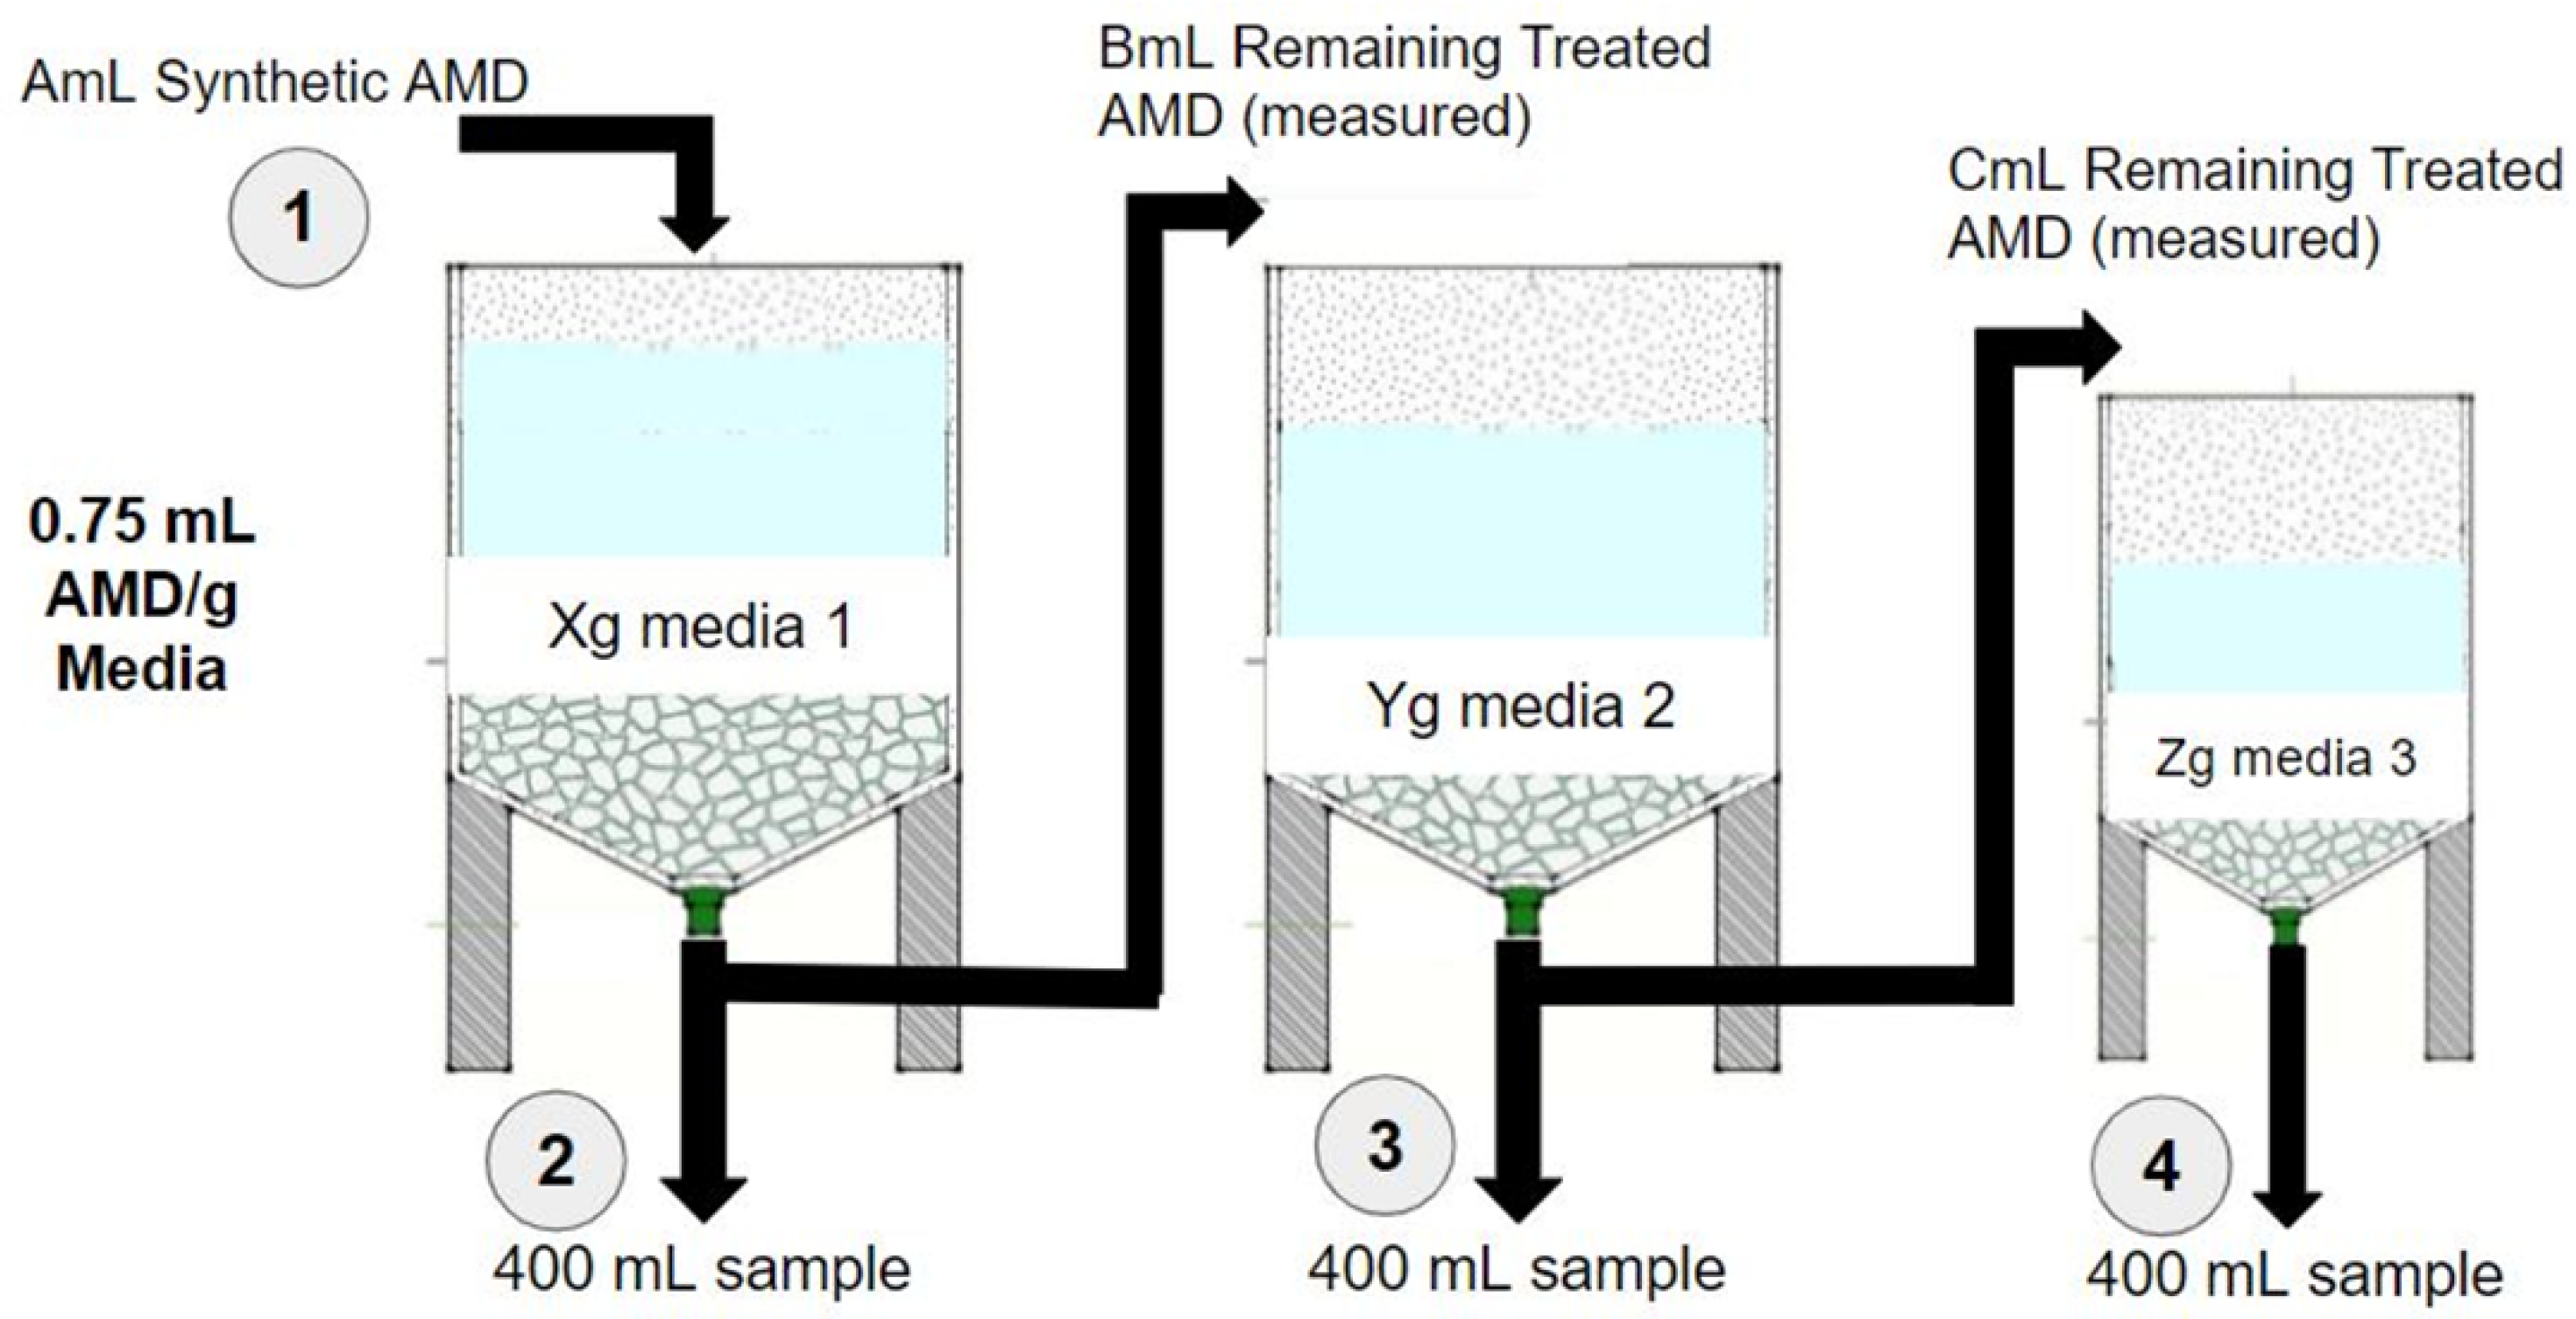 Water | Free Full-Text | Acid Mine Drainage Treatment Using a Process Train  with Laterite Mine Waste, Concrete Waste, and Limestone as Treatment Media